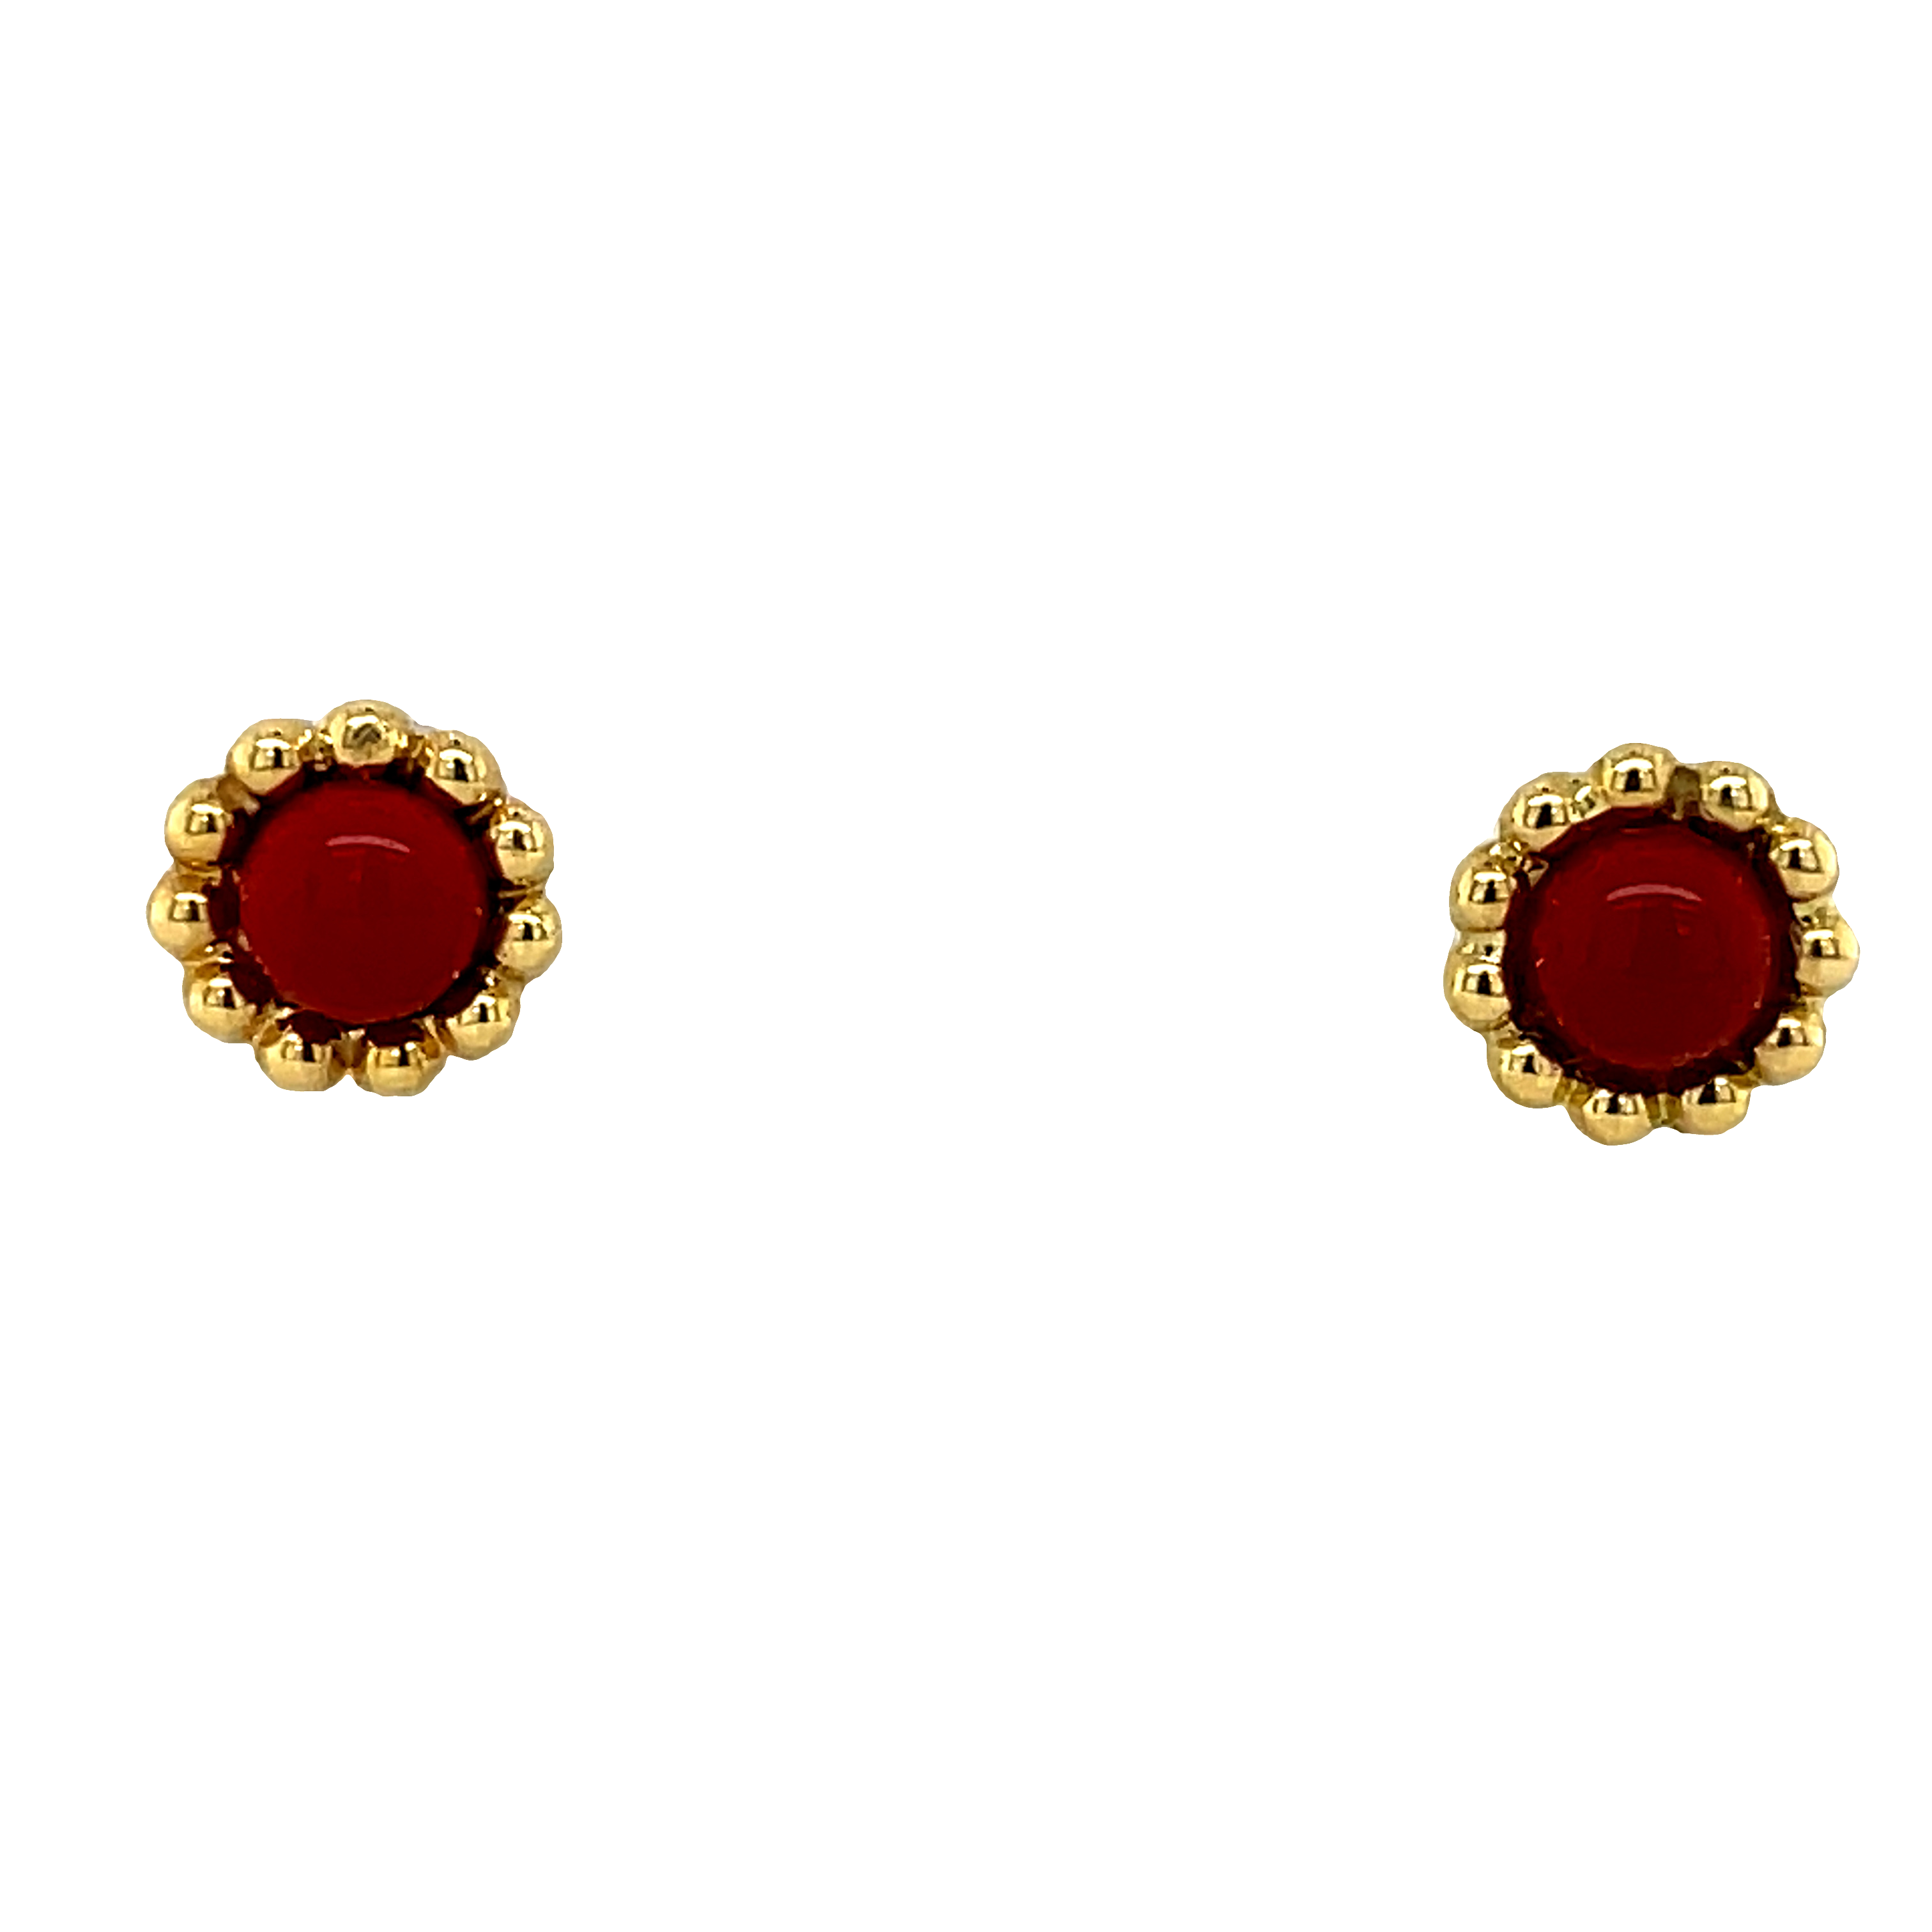  These baby earrings are crafted with 18k yellow gold and vibrant coral: a beautiful combination that will bring a cheerful glimmer to your little one's ears. Secured with screw backs for your peace of mind. A stunning keepsake that will bring fond memories.